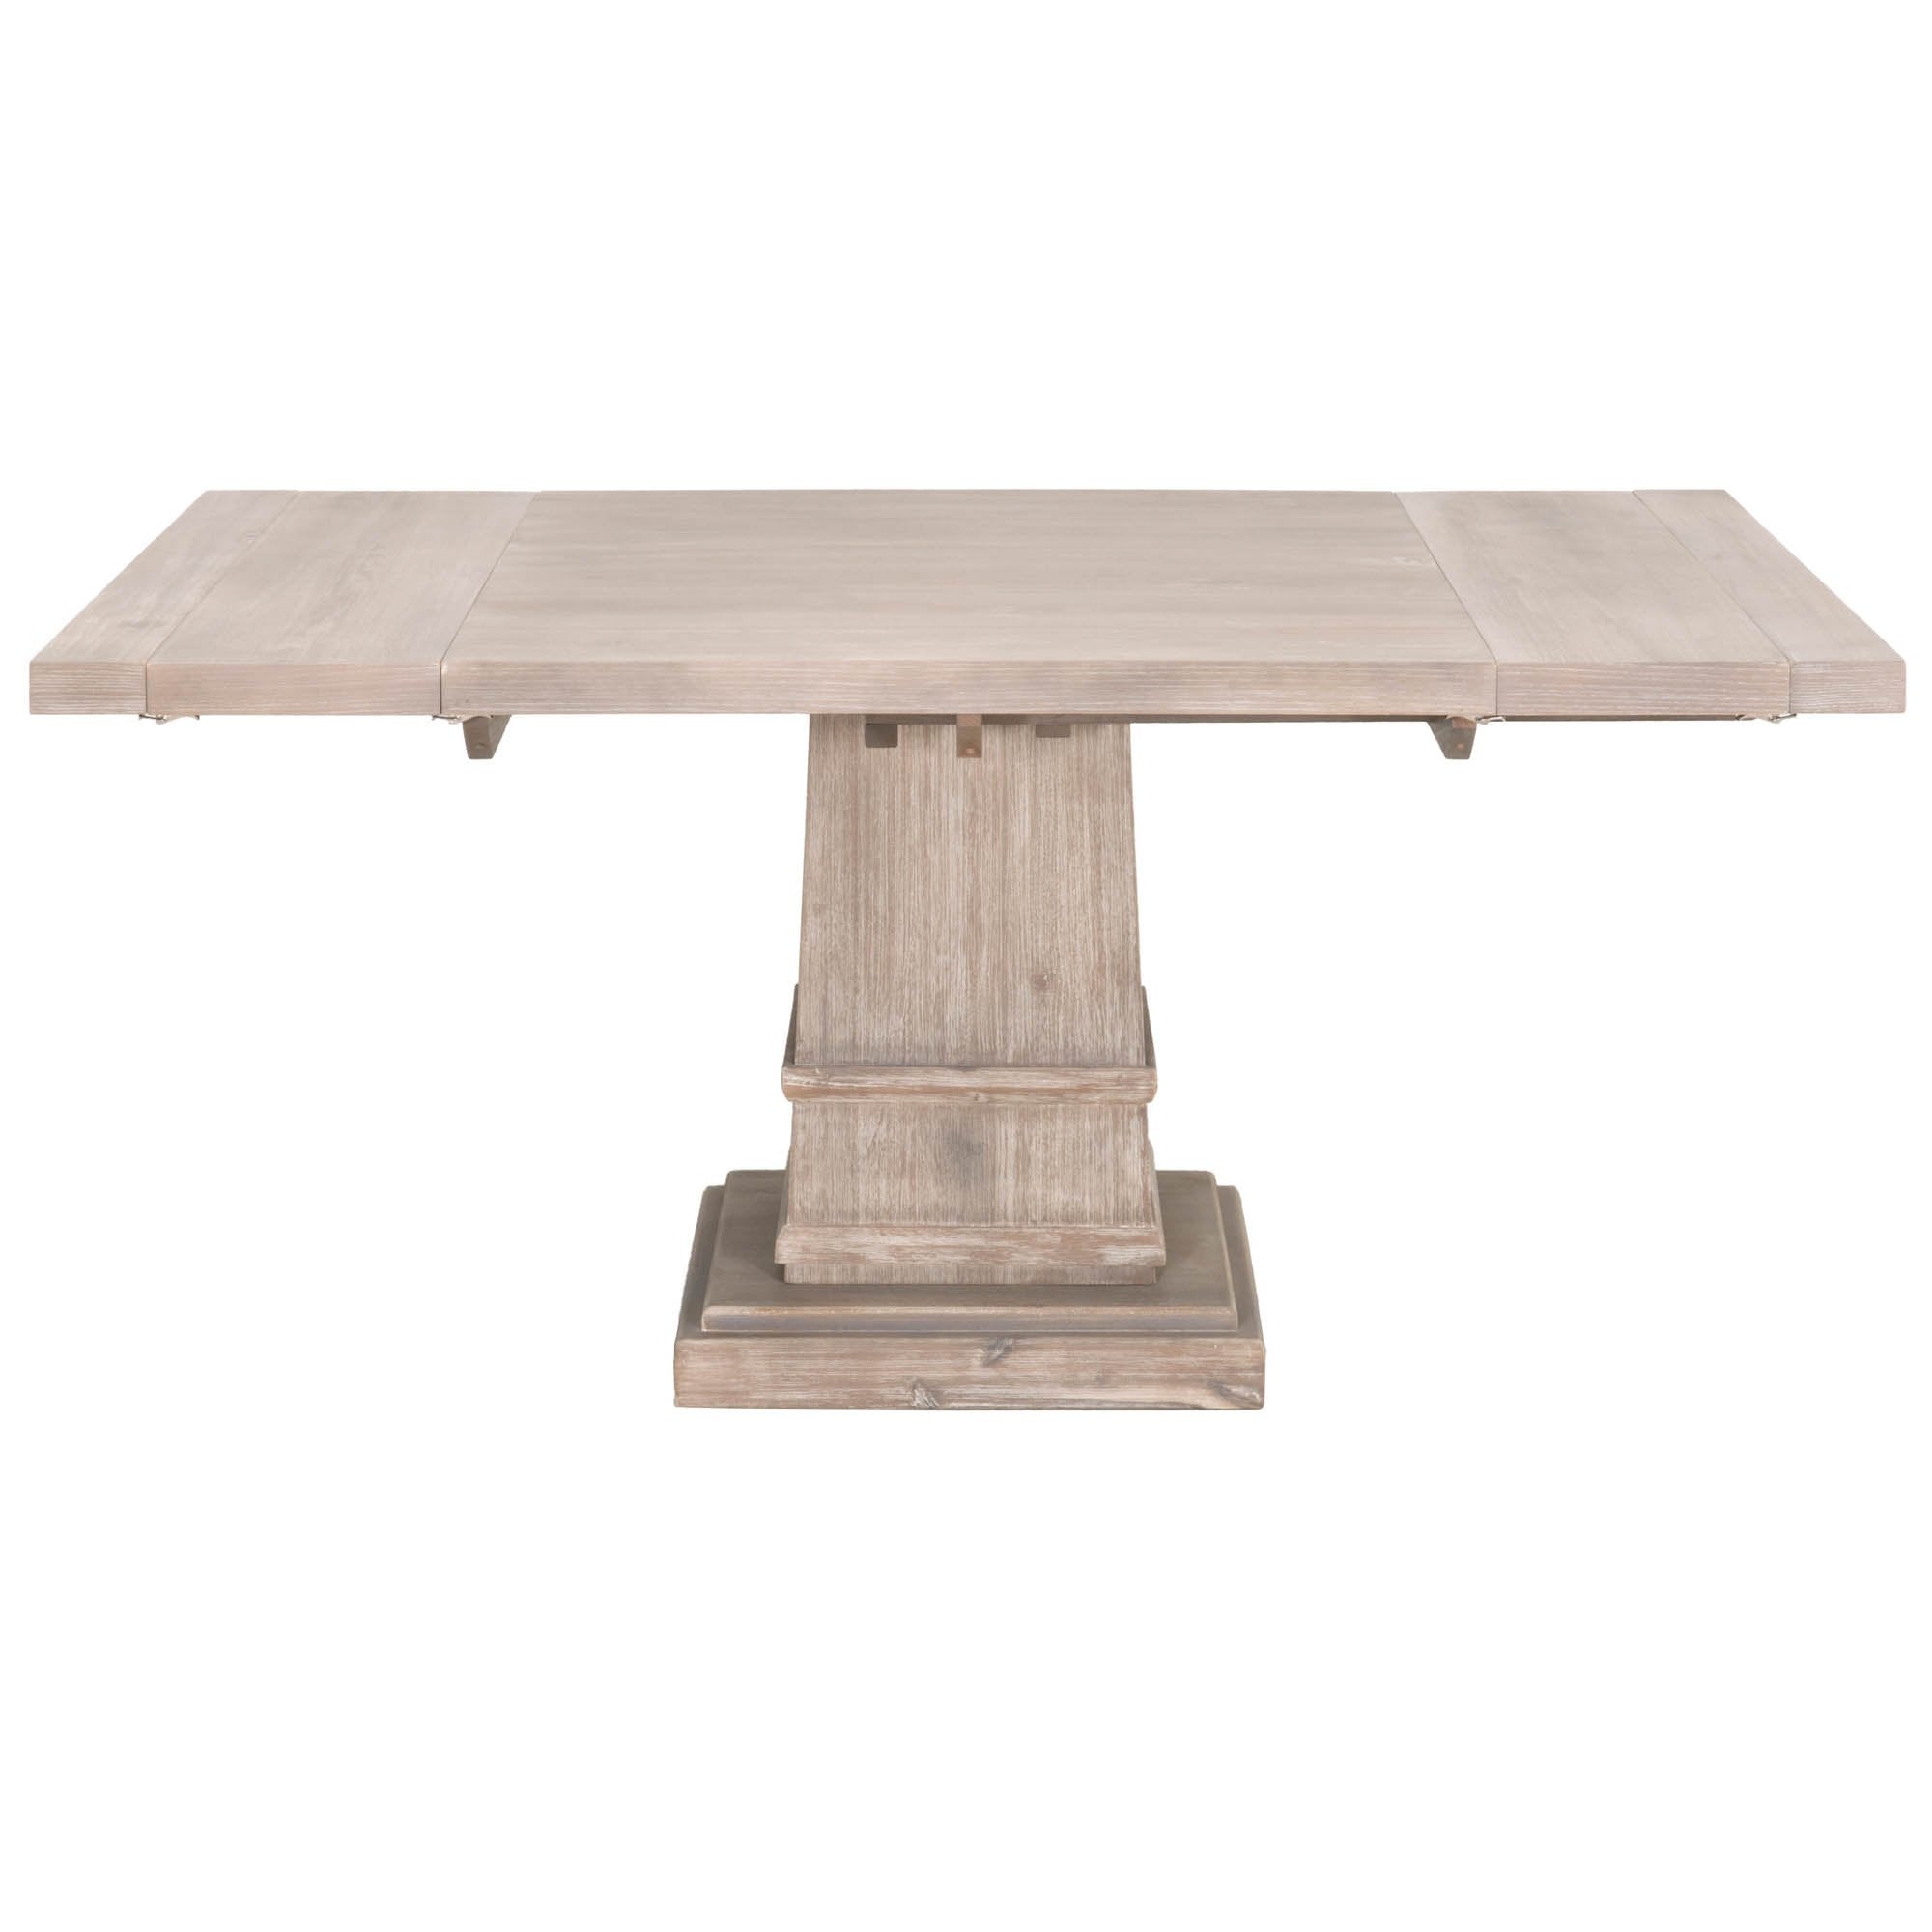 Hudson 44" Square Extension Dining Table in Natural Gray